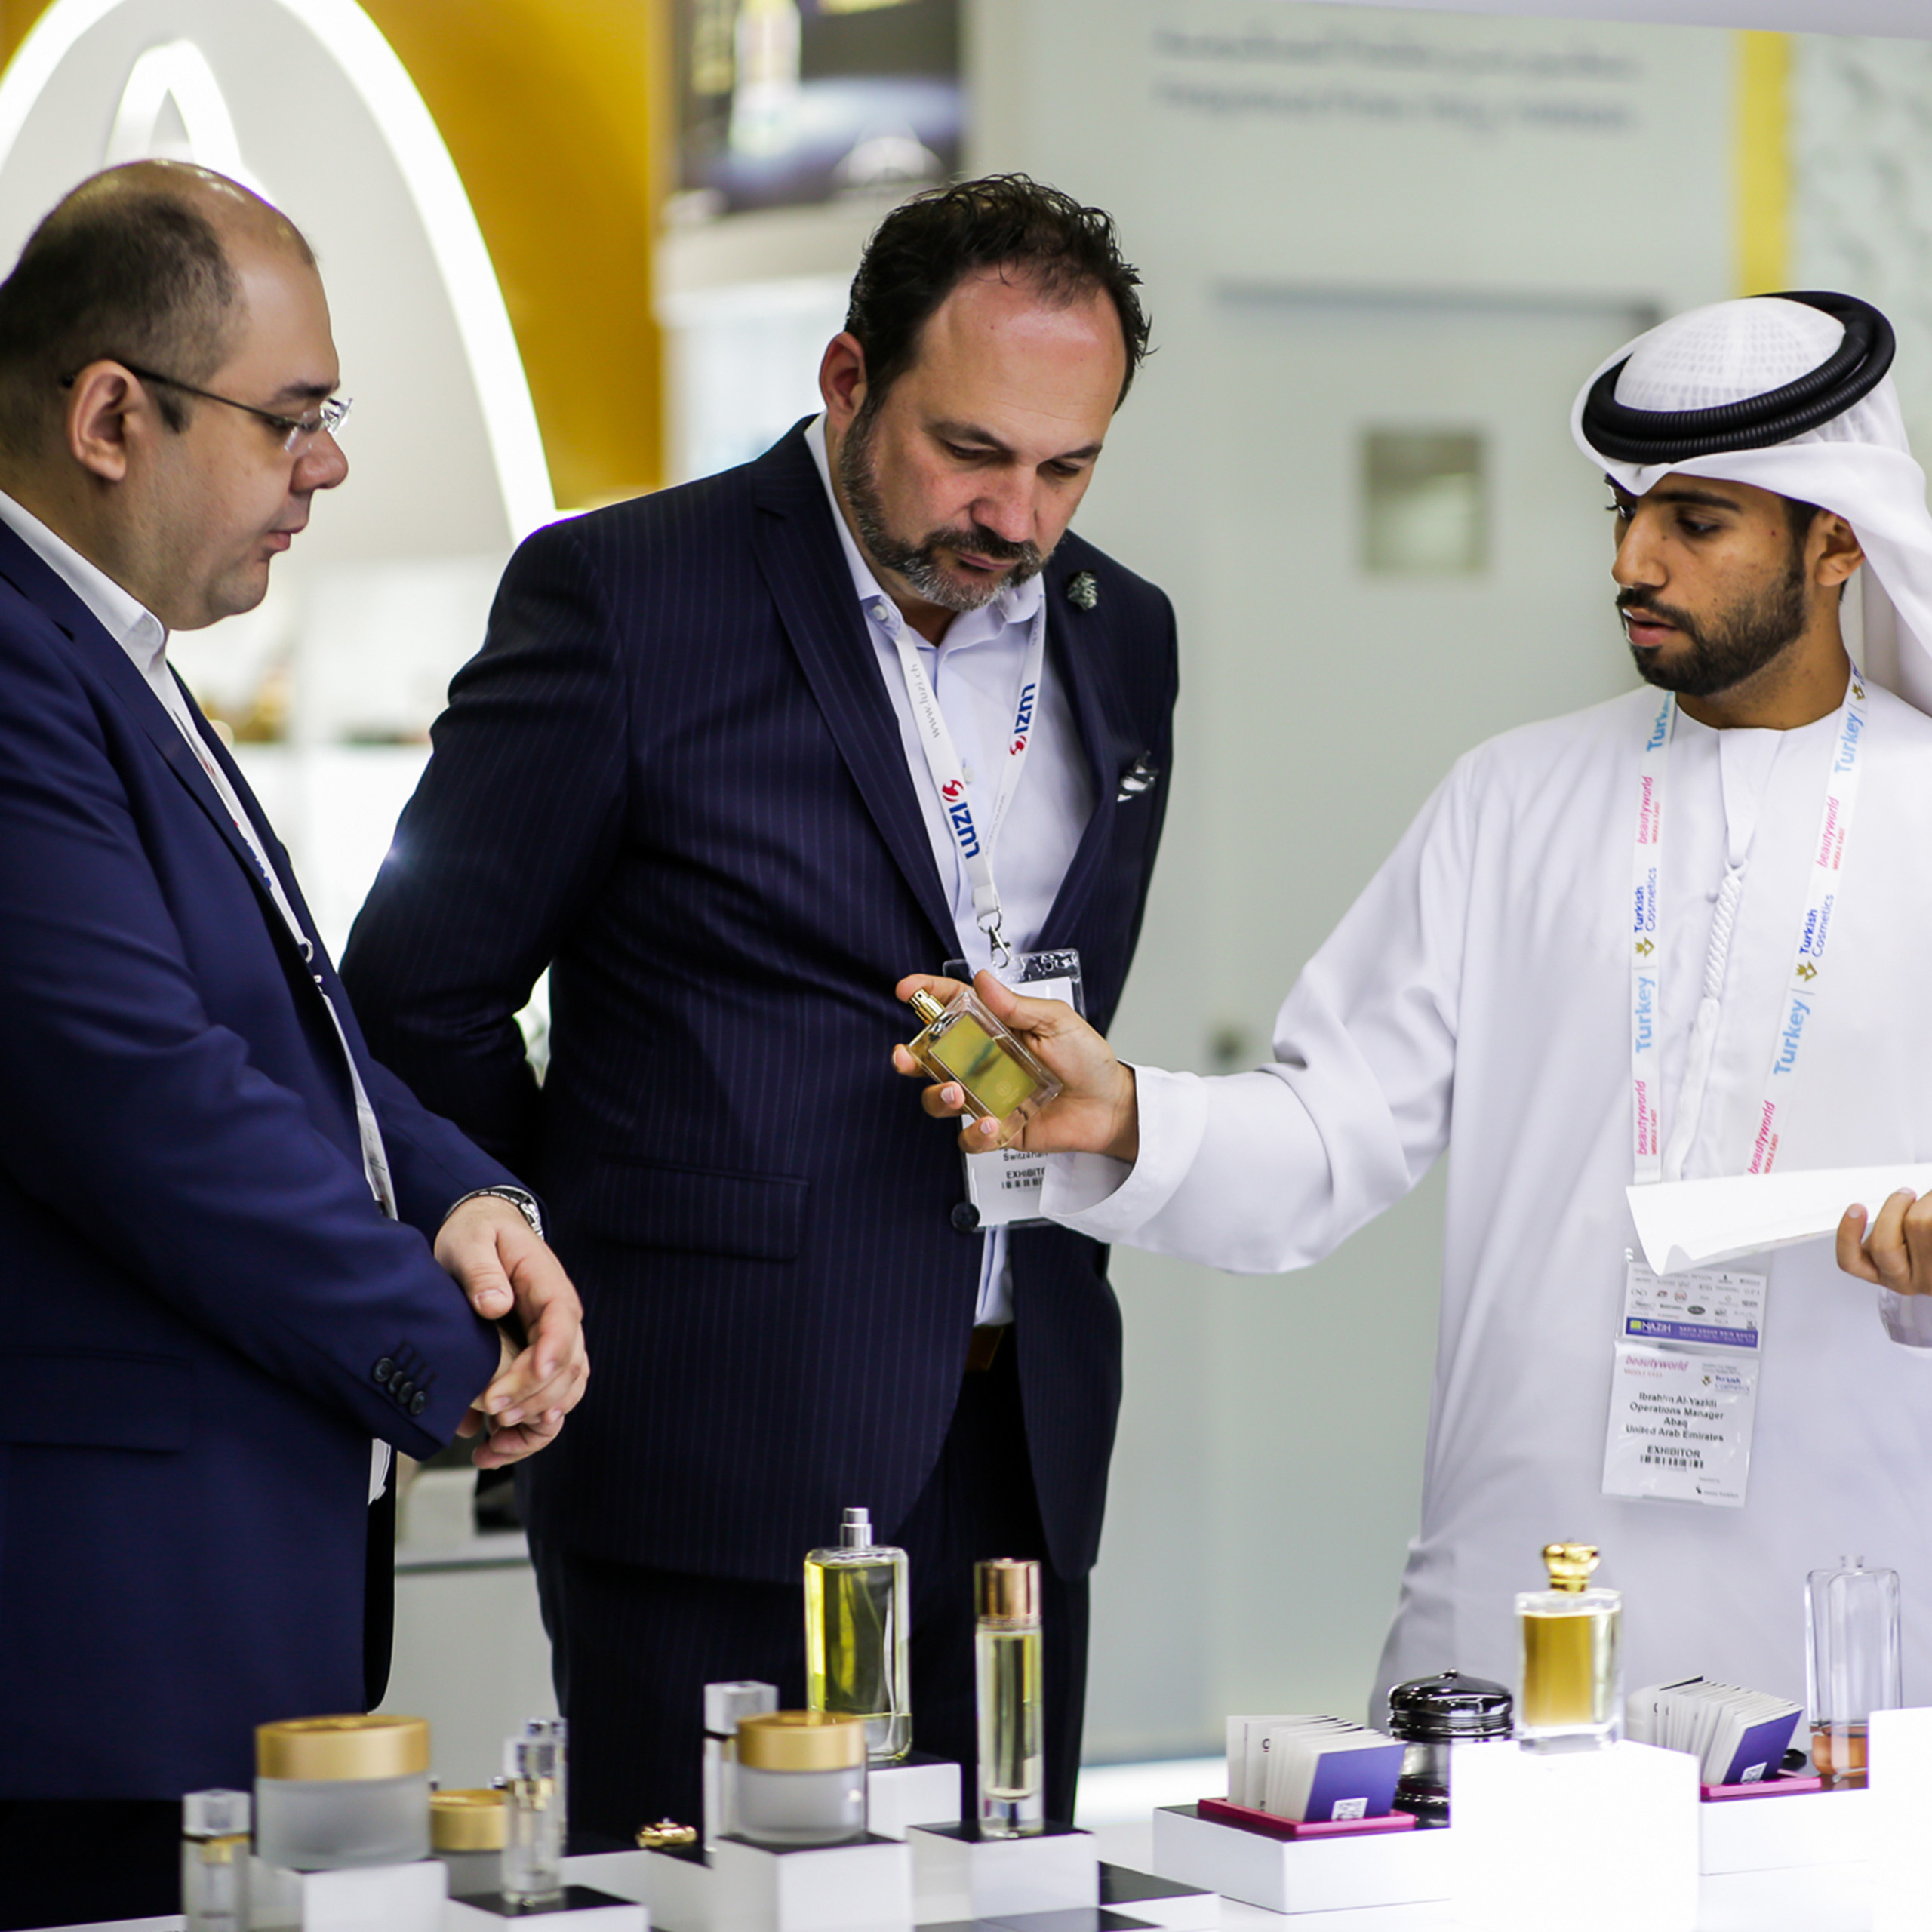 Beautyworld Middle East - Leading beauty and personal care brands converge in Dubai for Beautyworld Middle East 2021